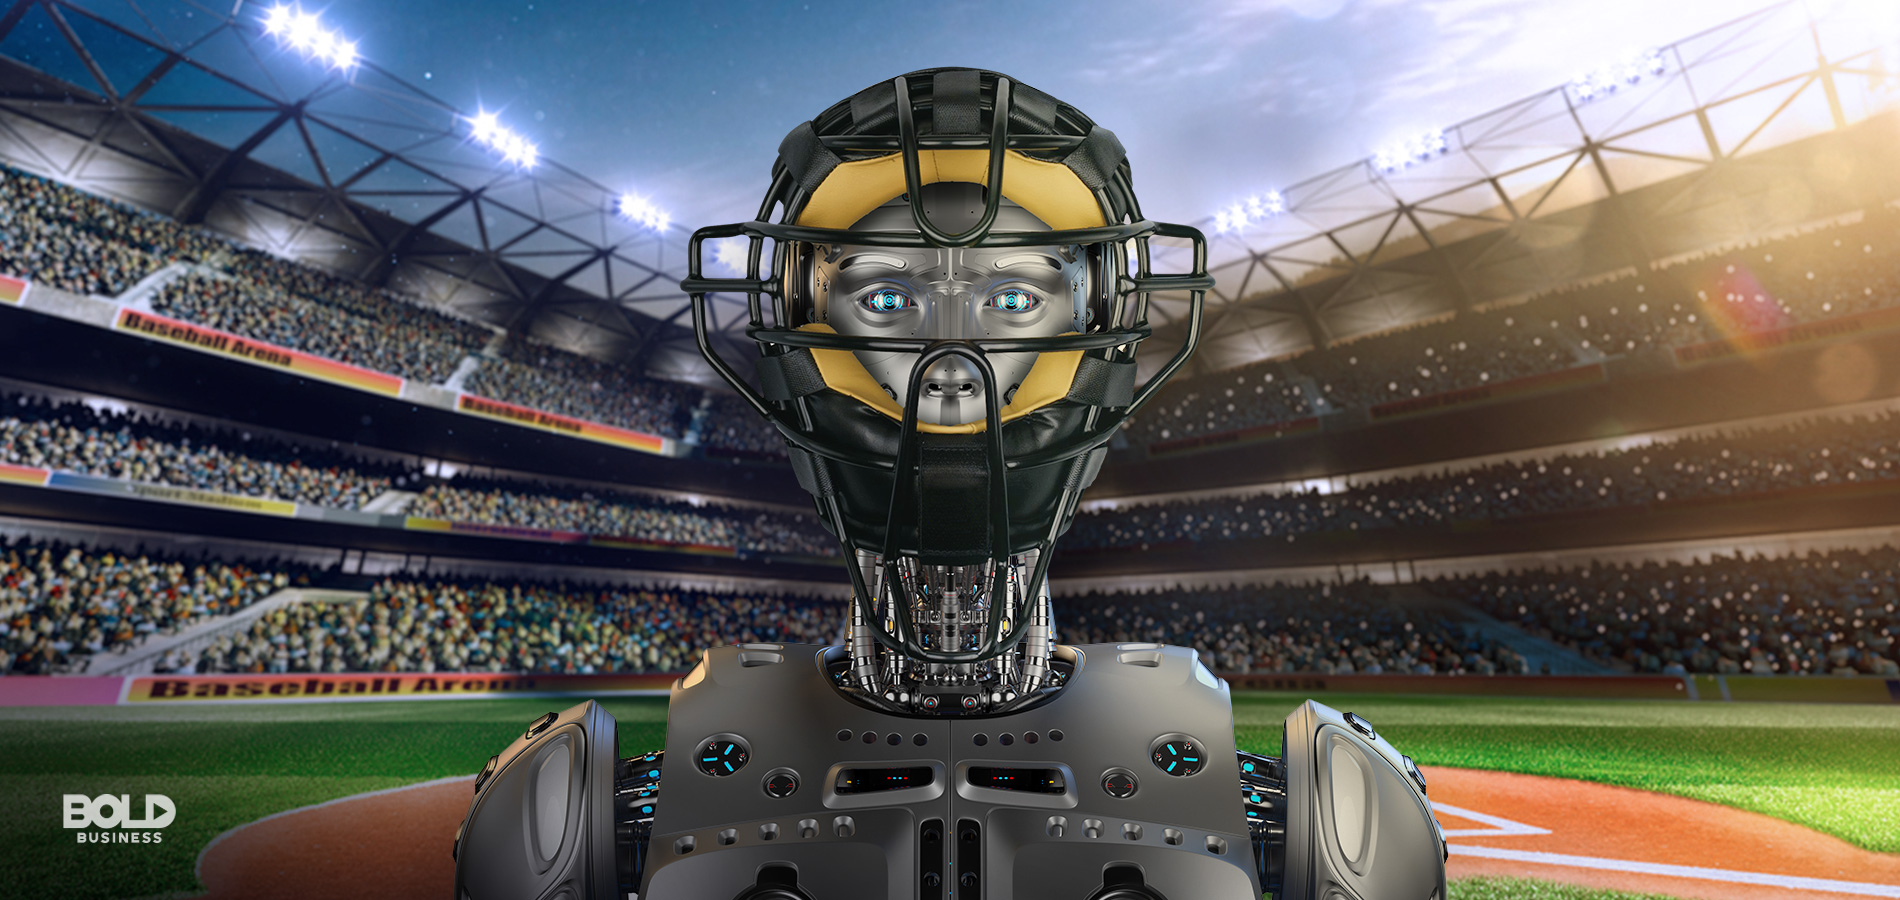 Robot Umpires, and How Robots Are Everywhere